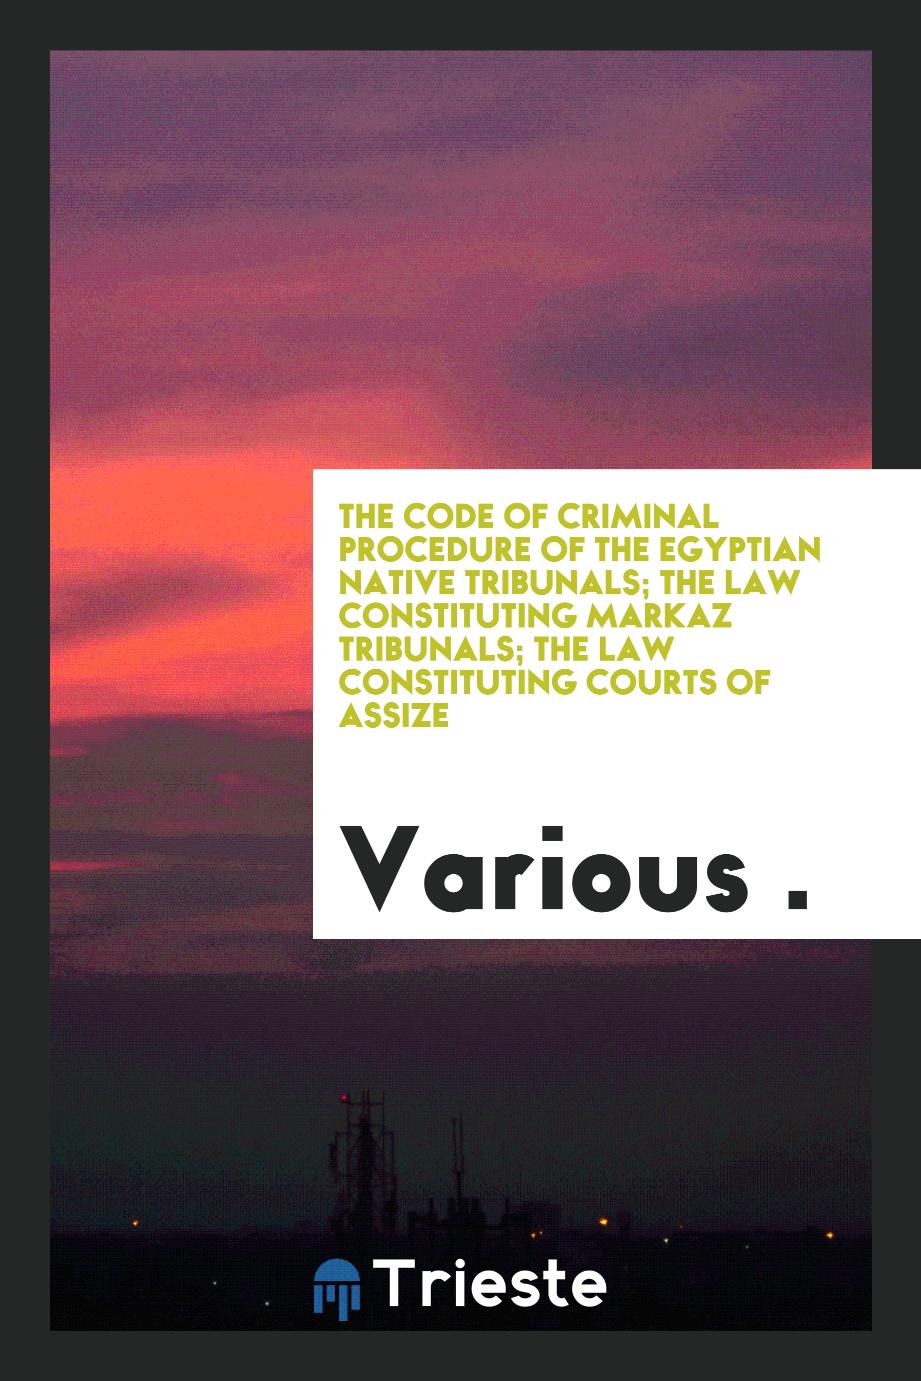 The Code of Criminal Procedure of the Egyptian Native Tribunals; The Law Constituting Markaz Tribunals; The Law Constituting Courts of Assize